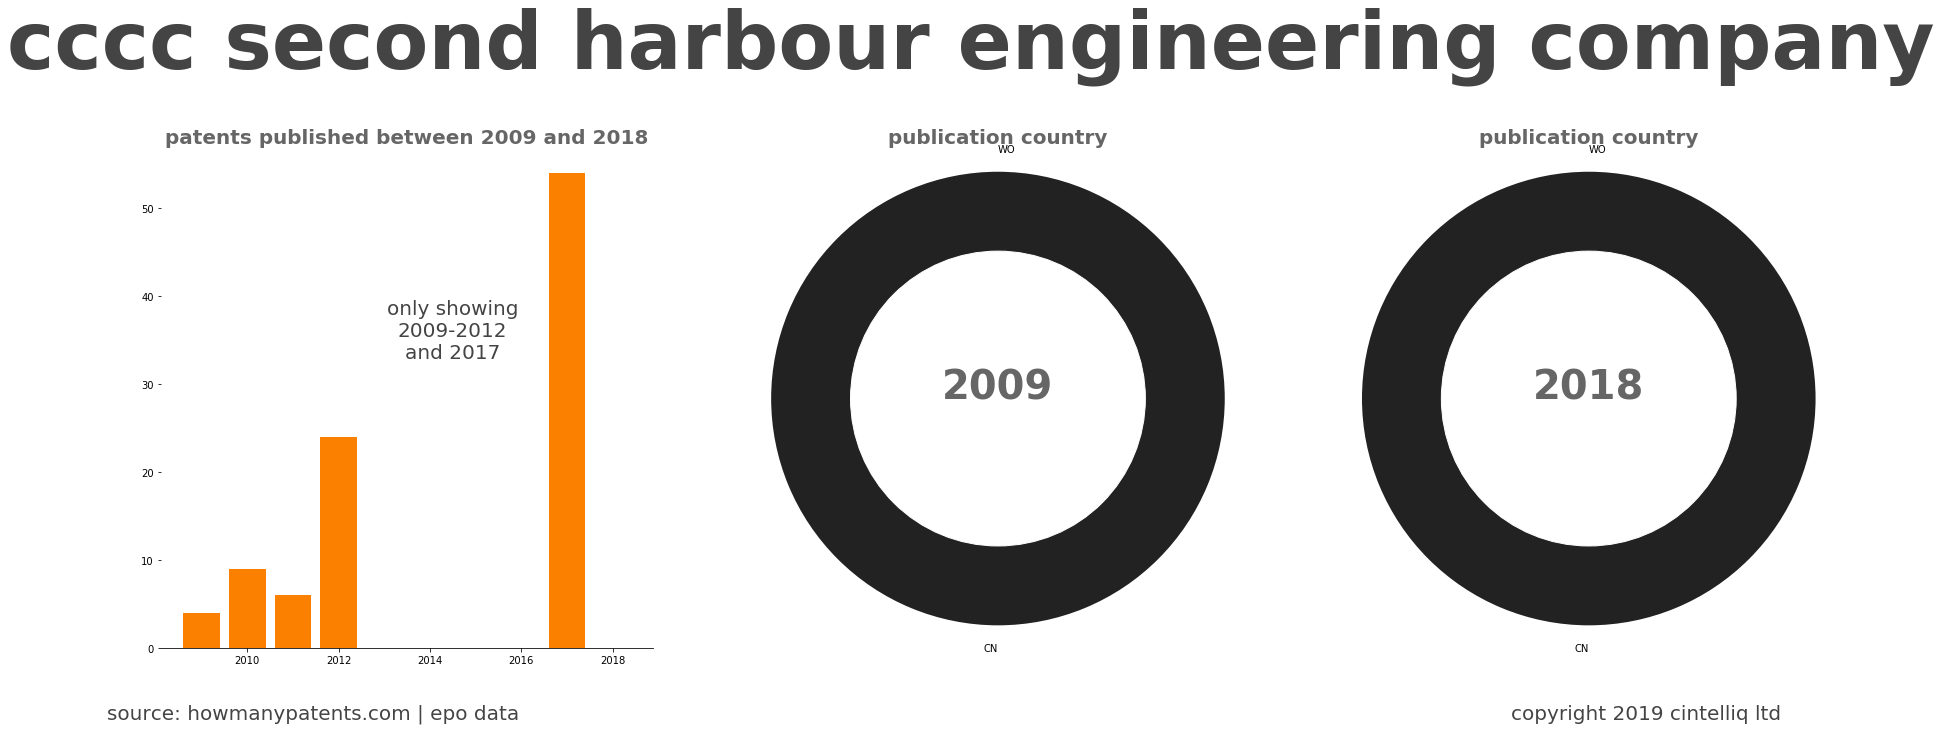 summary of patents for Cccc Second Harbour Engineering Company